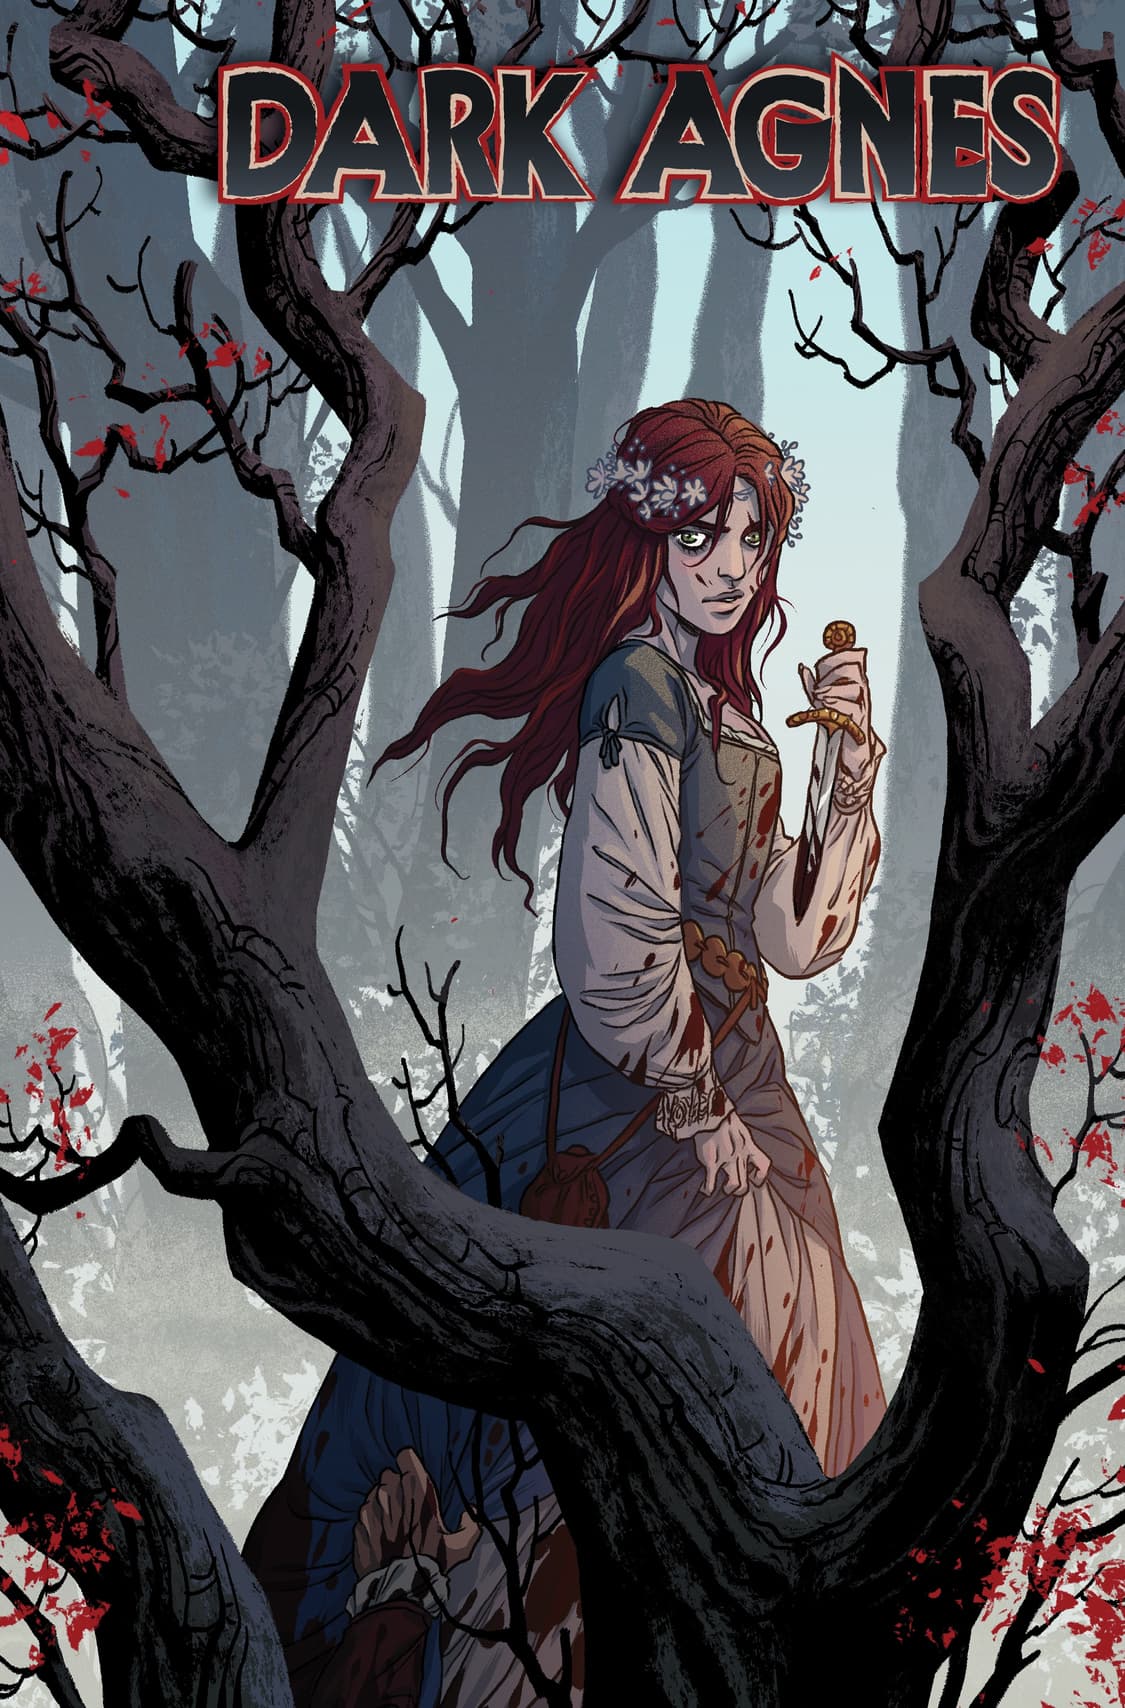 Variant art by Becky Cloonan